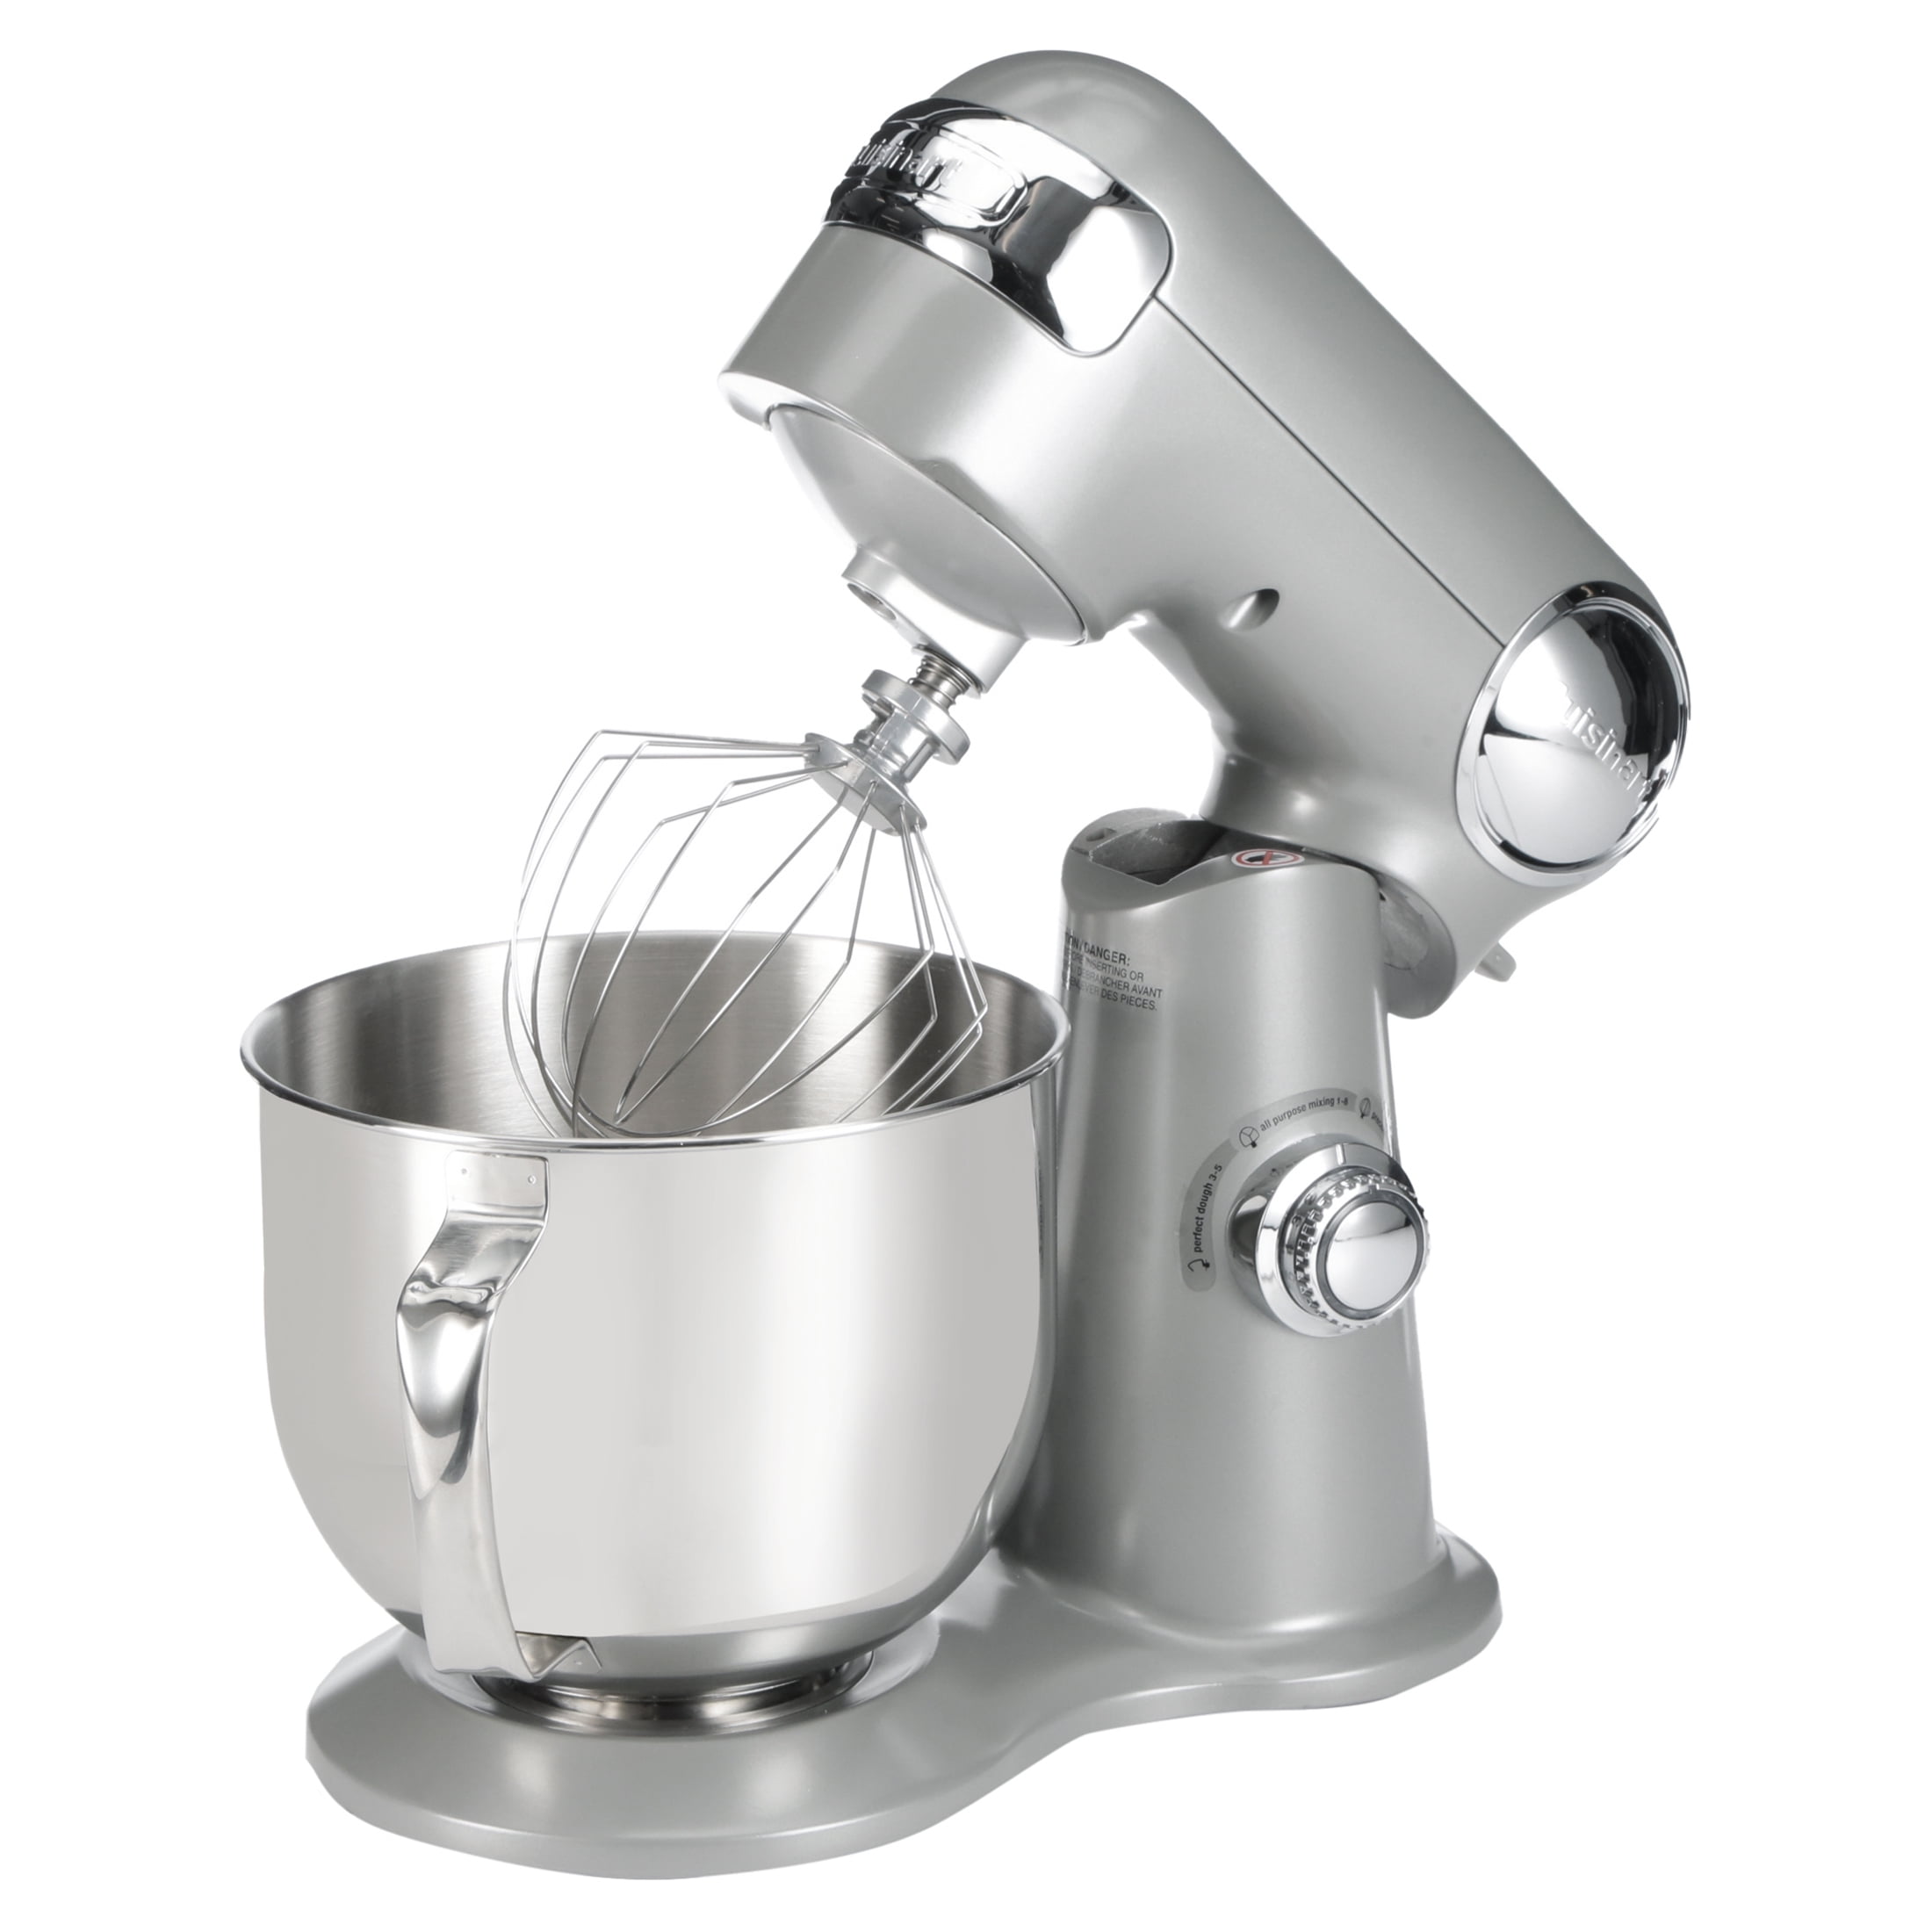 Cuisinart Precision Master 5.5qt Stand Mixer - Silver Lining - Sm-50bc :  Target